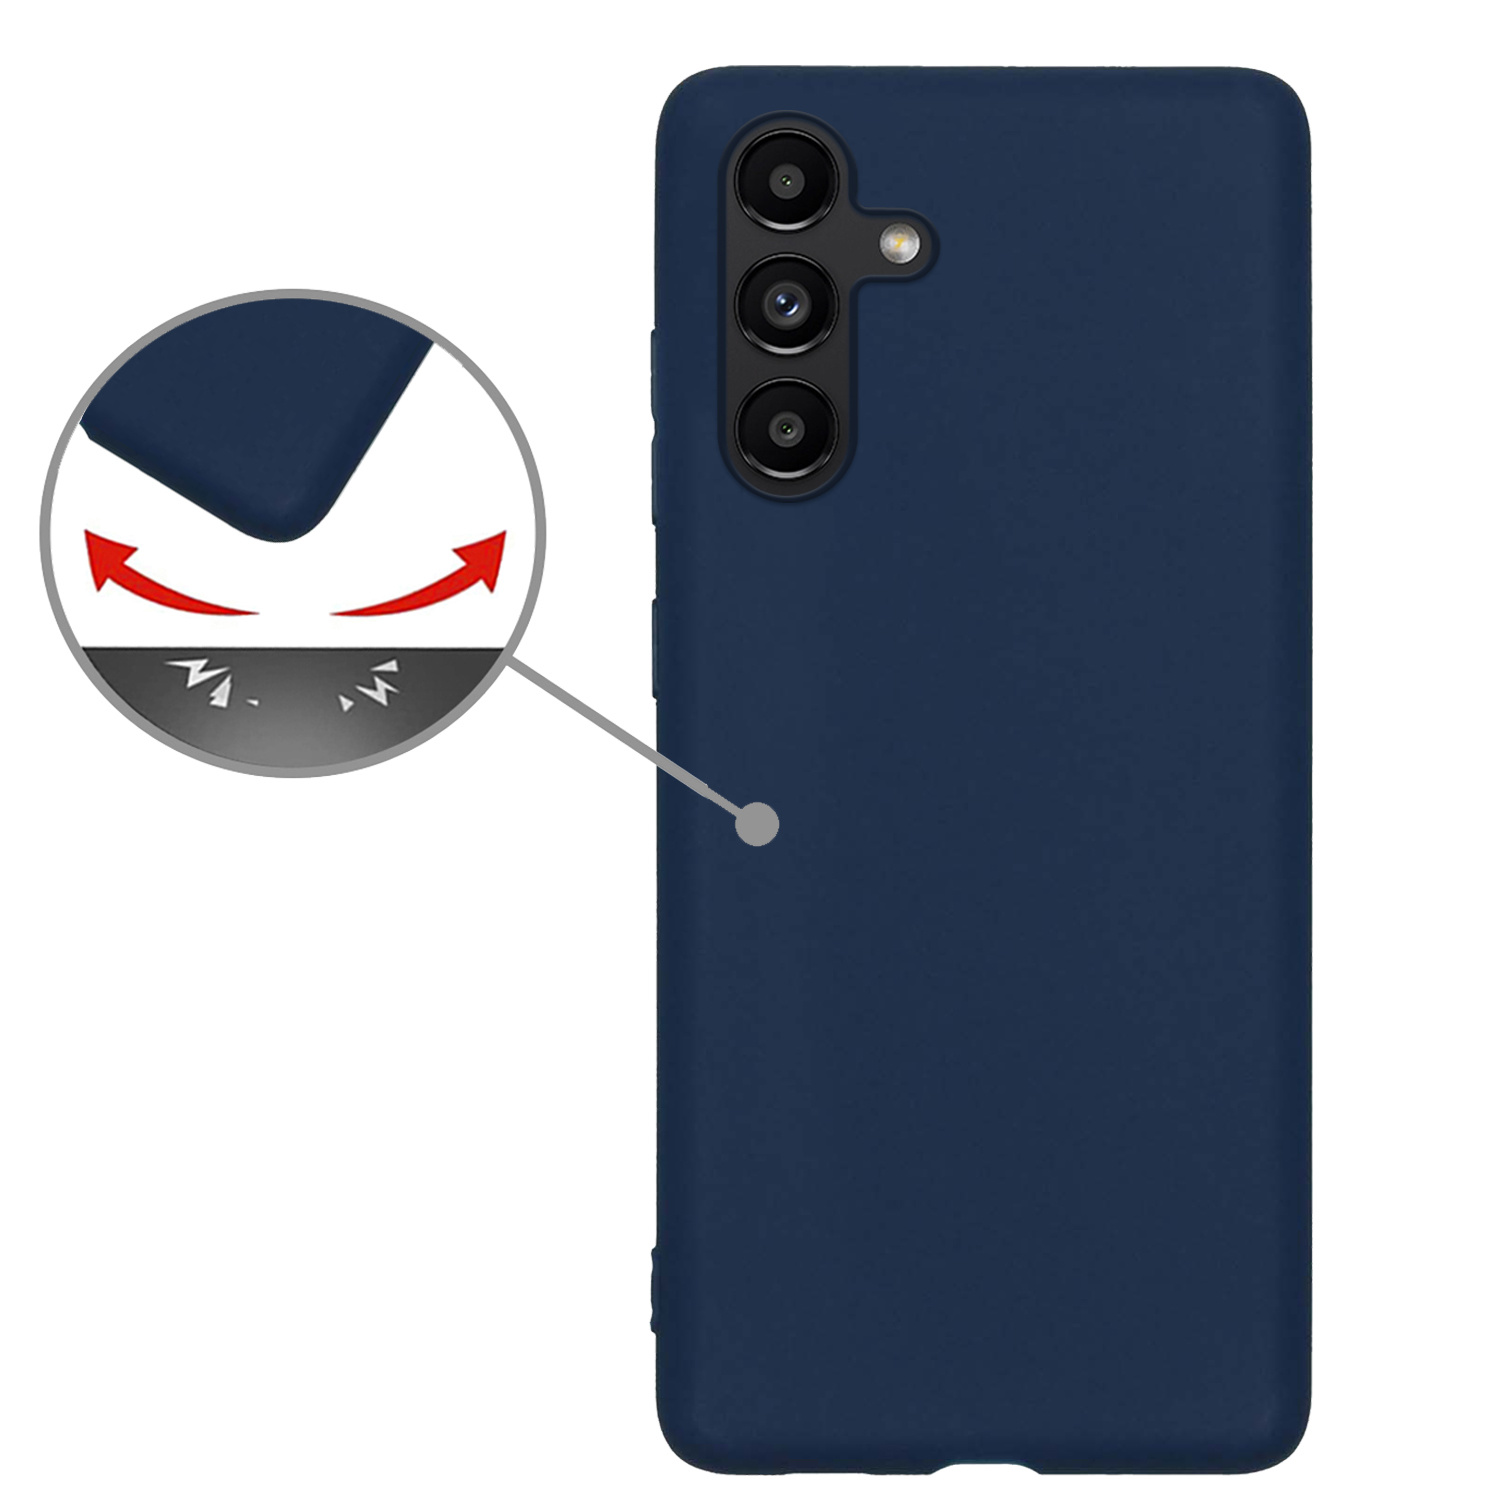 Nomfy Samsung Galaxy A13 5G Hoesje Siliconen - Samsung Galaxy Galaxy A13 5G Hoesje Donker Blauw Case - Samsung Galaxy Galaxy A13 5G Cover Siliconen Back Cover -Donker Blauw